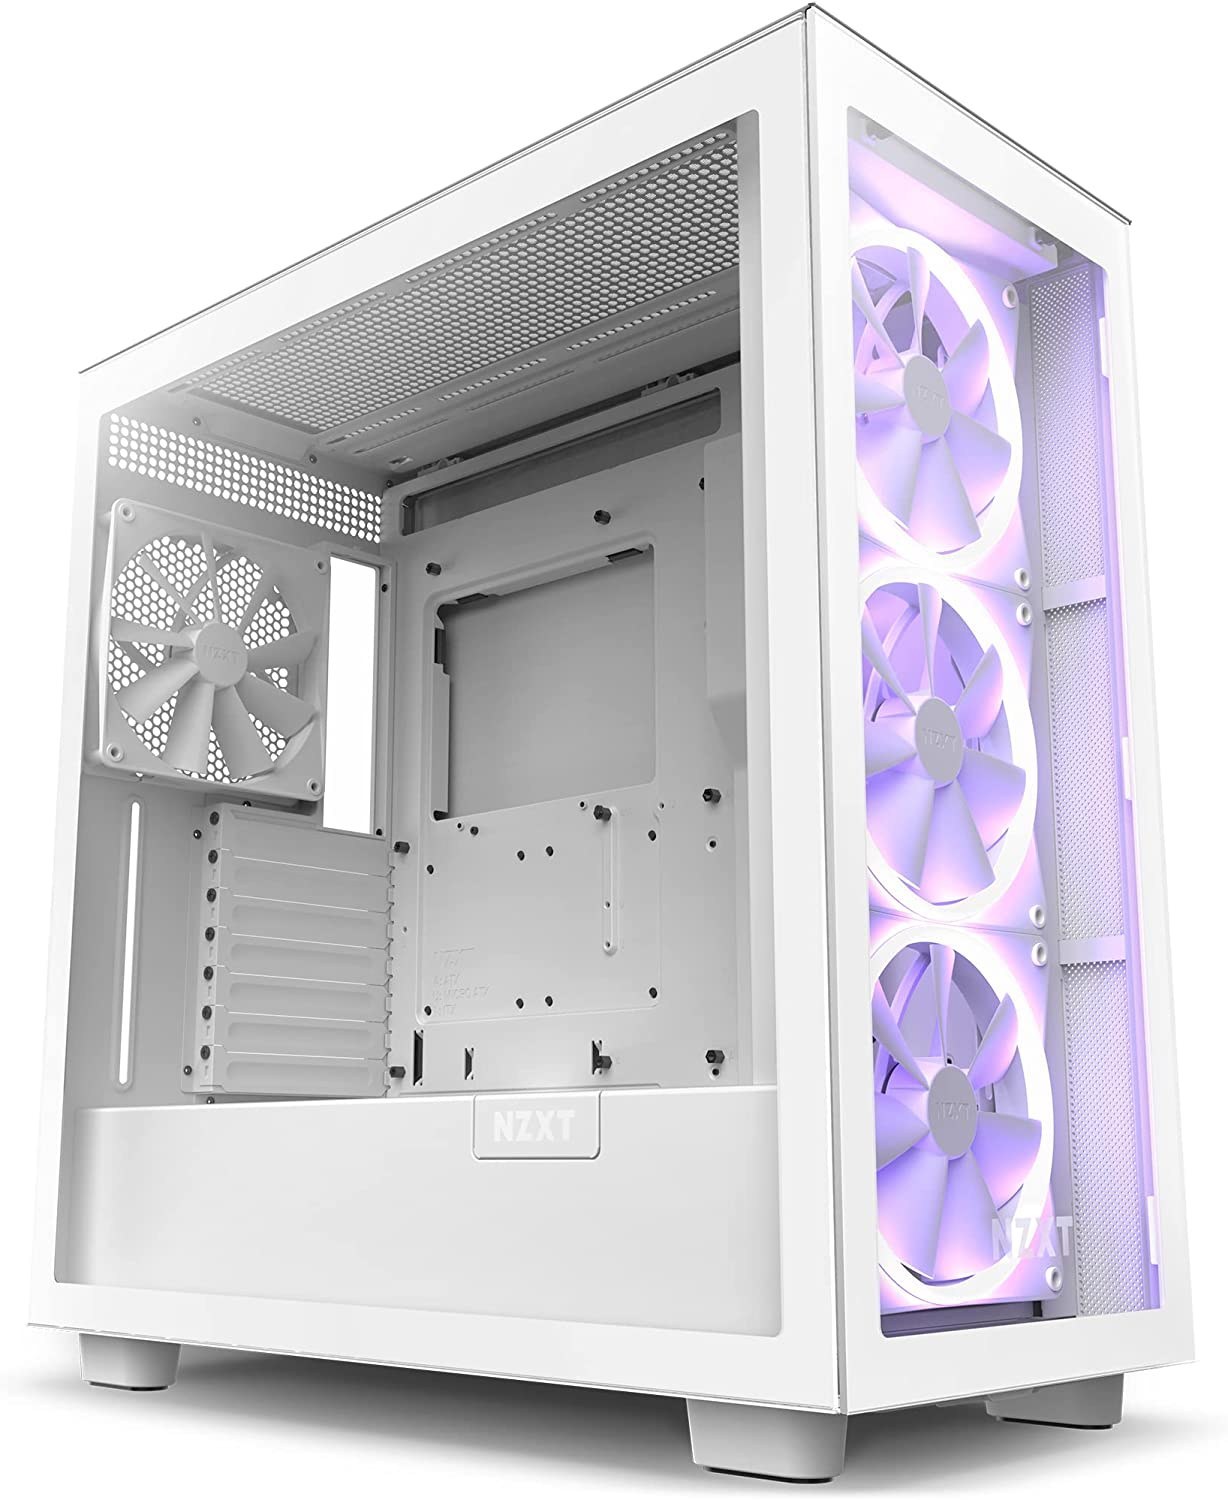  NZXT H9 Elite Dual-Chamber ATX Mid-Tower PC Gaming Case –  Includes 3 x 120mm F120 RGB Duo Fans with Controller– Glass Front, Top &  Side Panels 360mm Radiator Support Cable Management